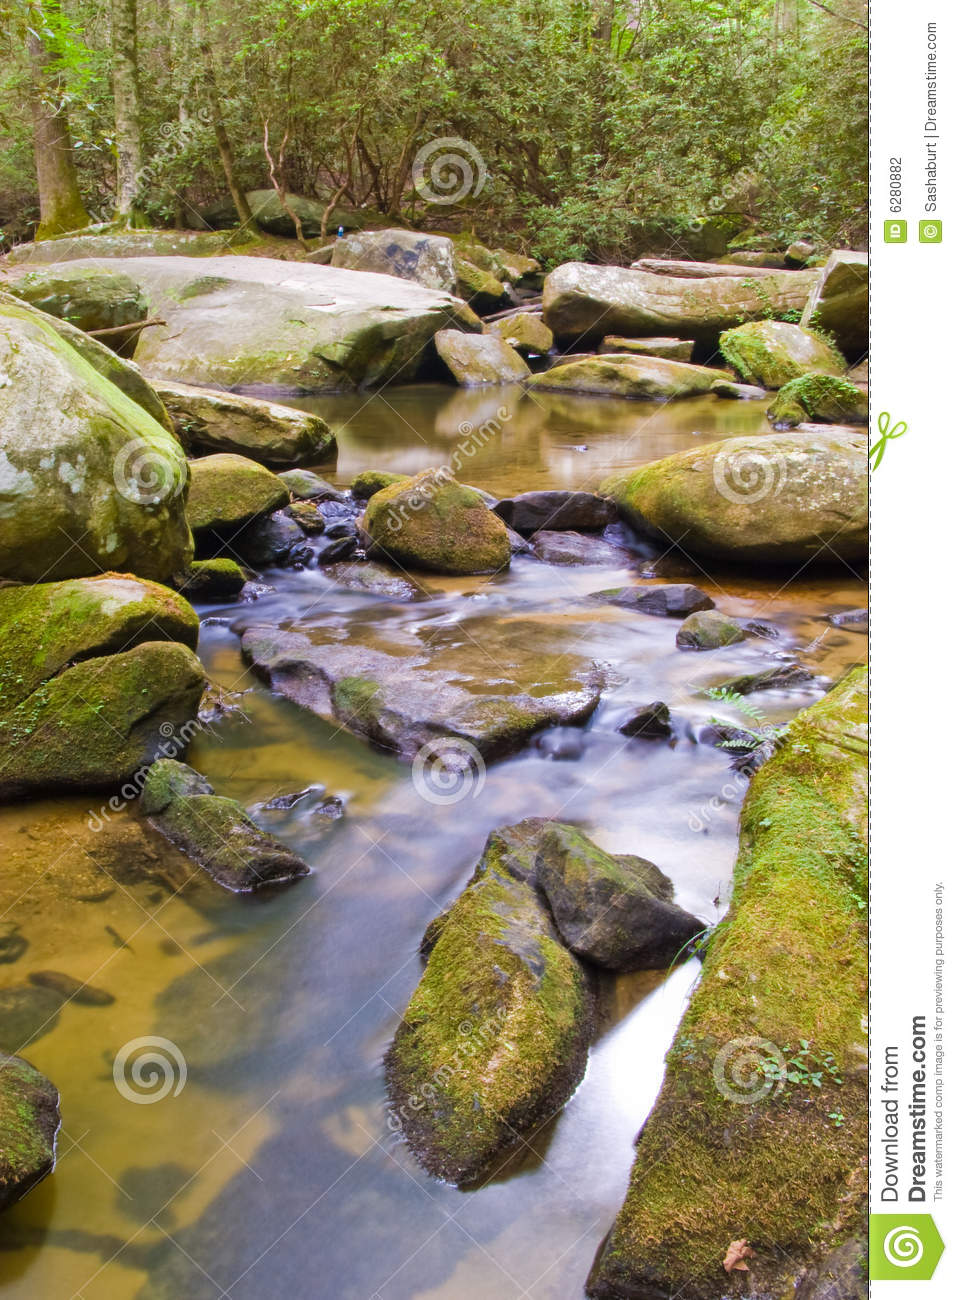 River In Appalachian Mountains Stock Photography   Image  6280882